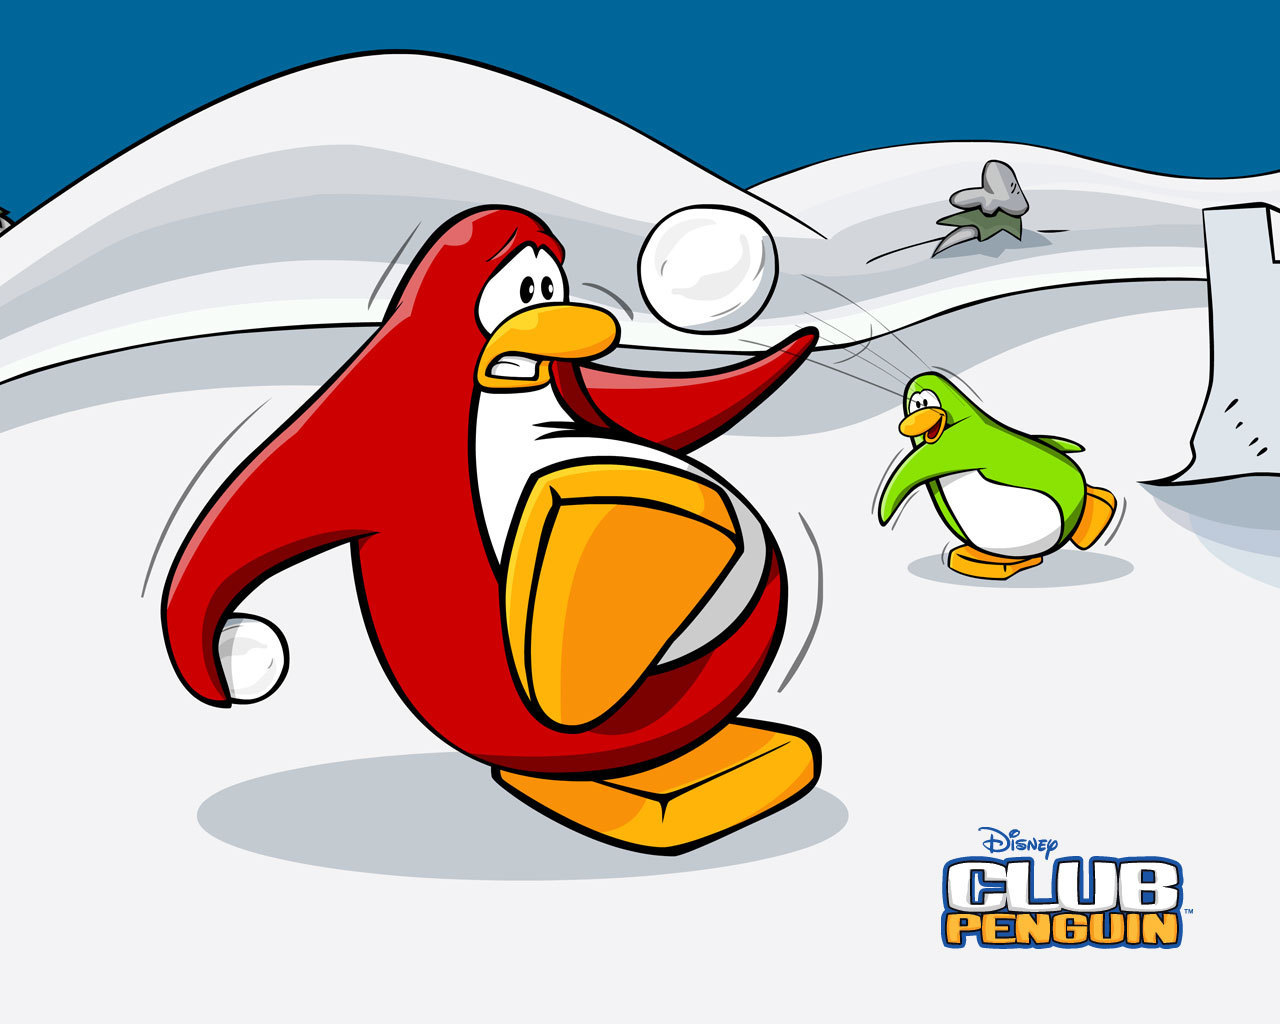 A funny snowball fight - Club Penguin 1280x1024